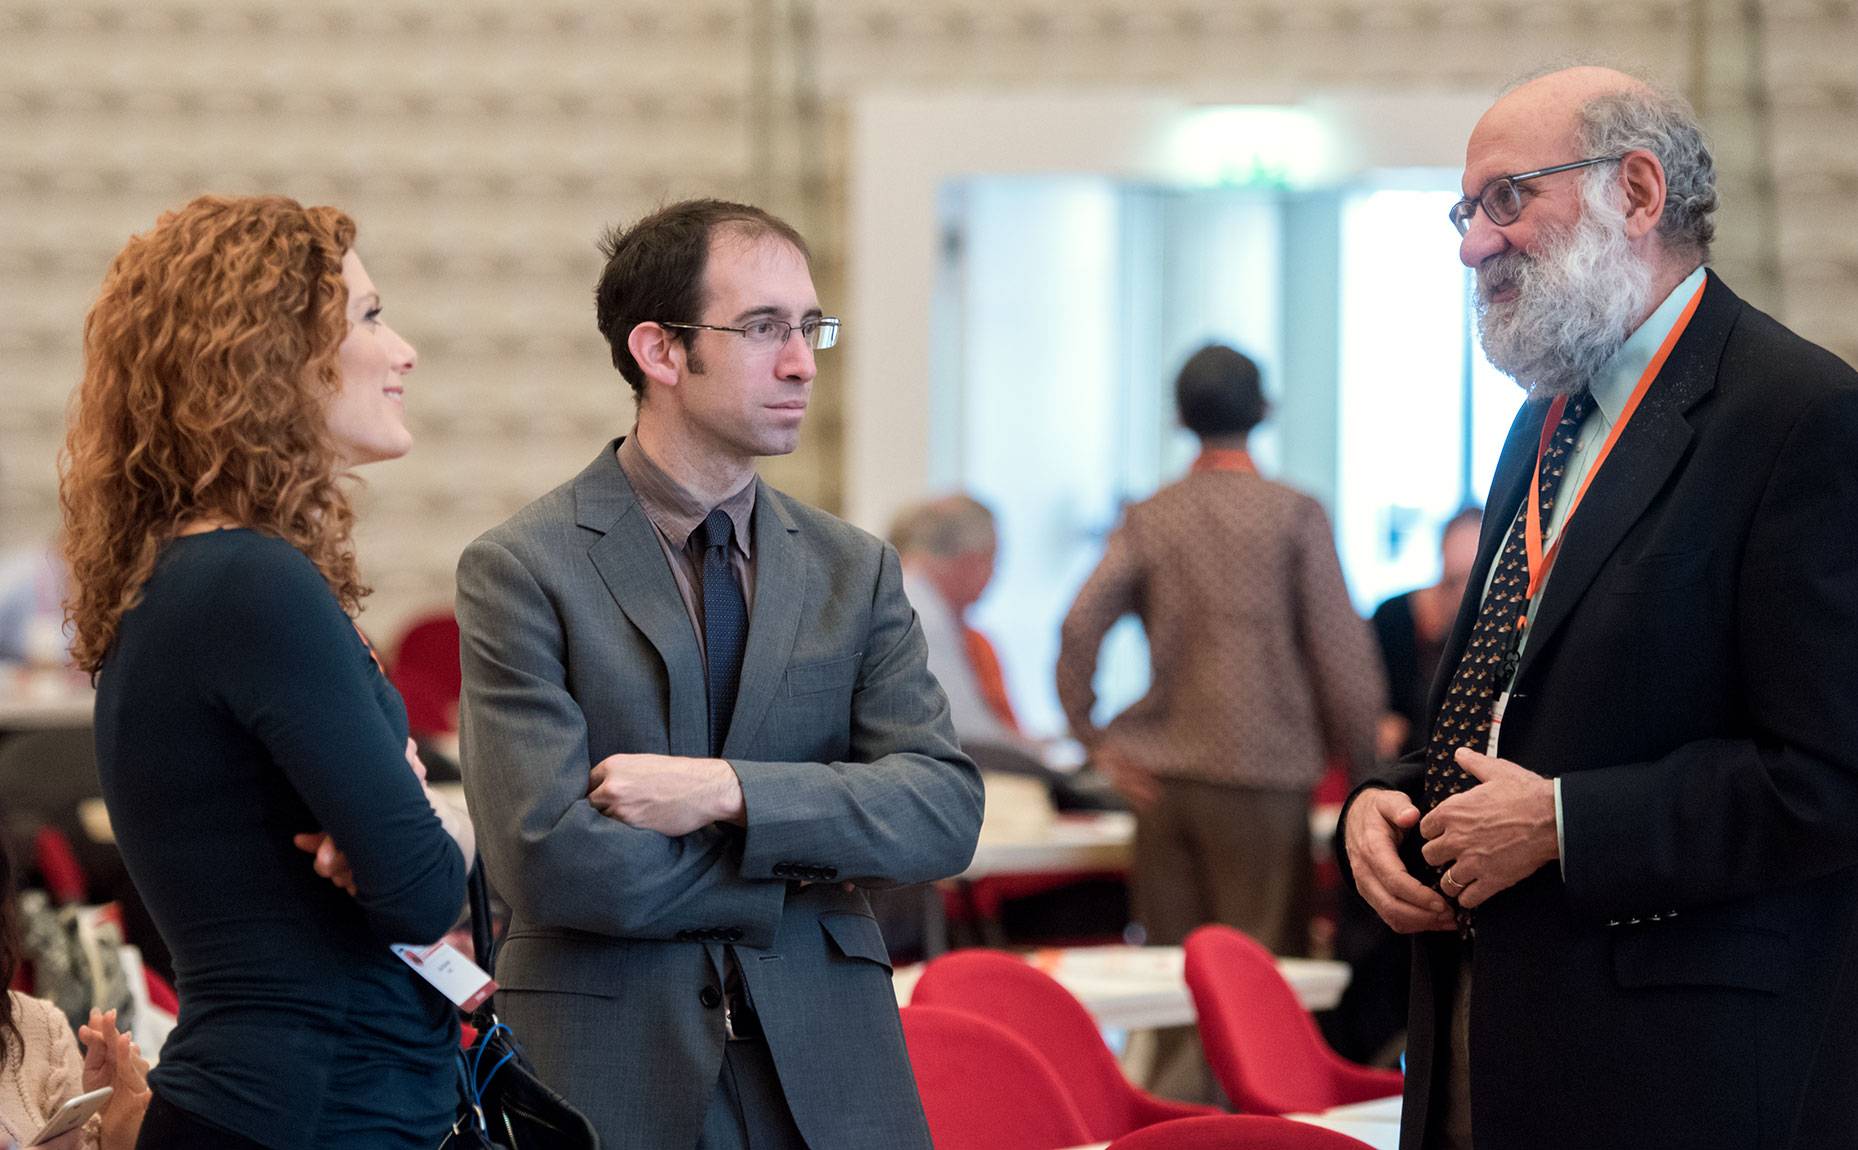 CNBC’s Julia Boorstin, a moderator at the conference, chats with Princeton faculty Nick Feamster and David Dobkin during a break between panels.